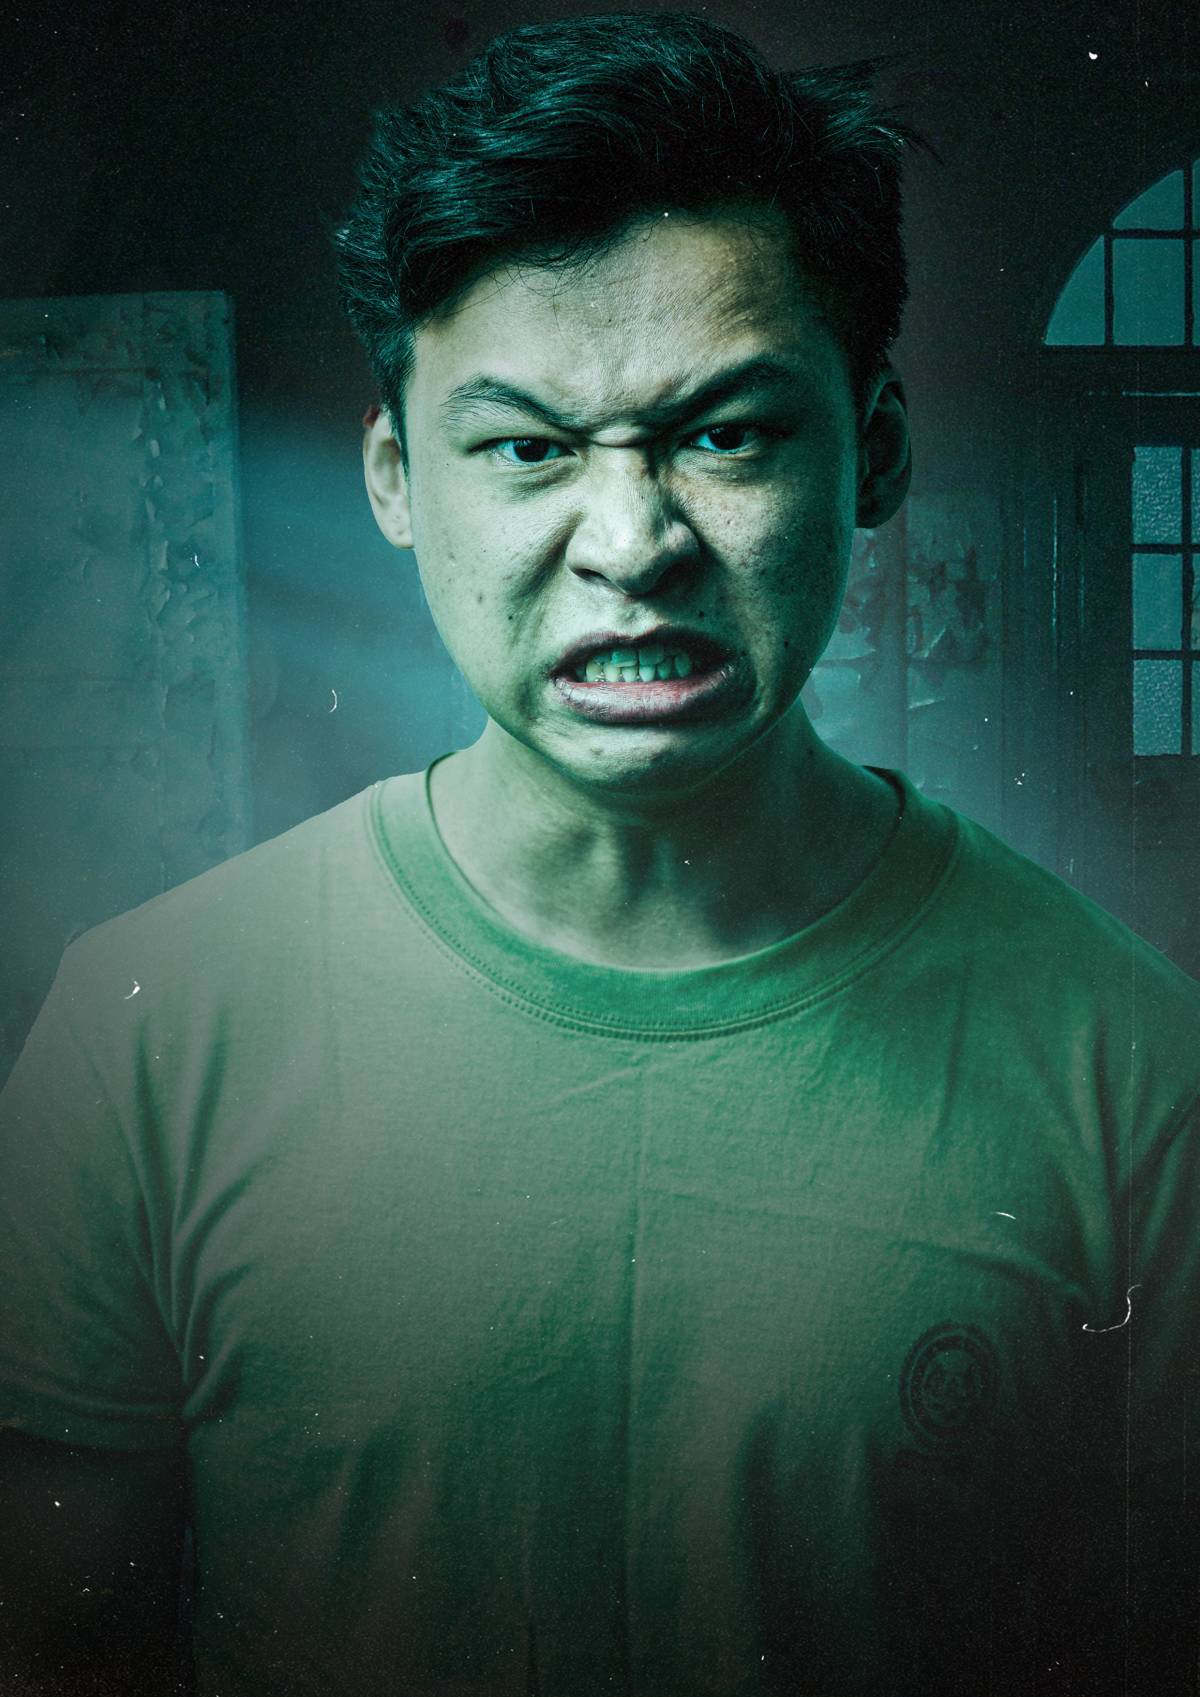 Murder at Old Changi Hospital: The Haunting Starts This Halloween Season from 8 October 2021